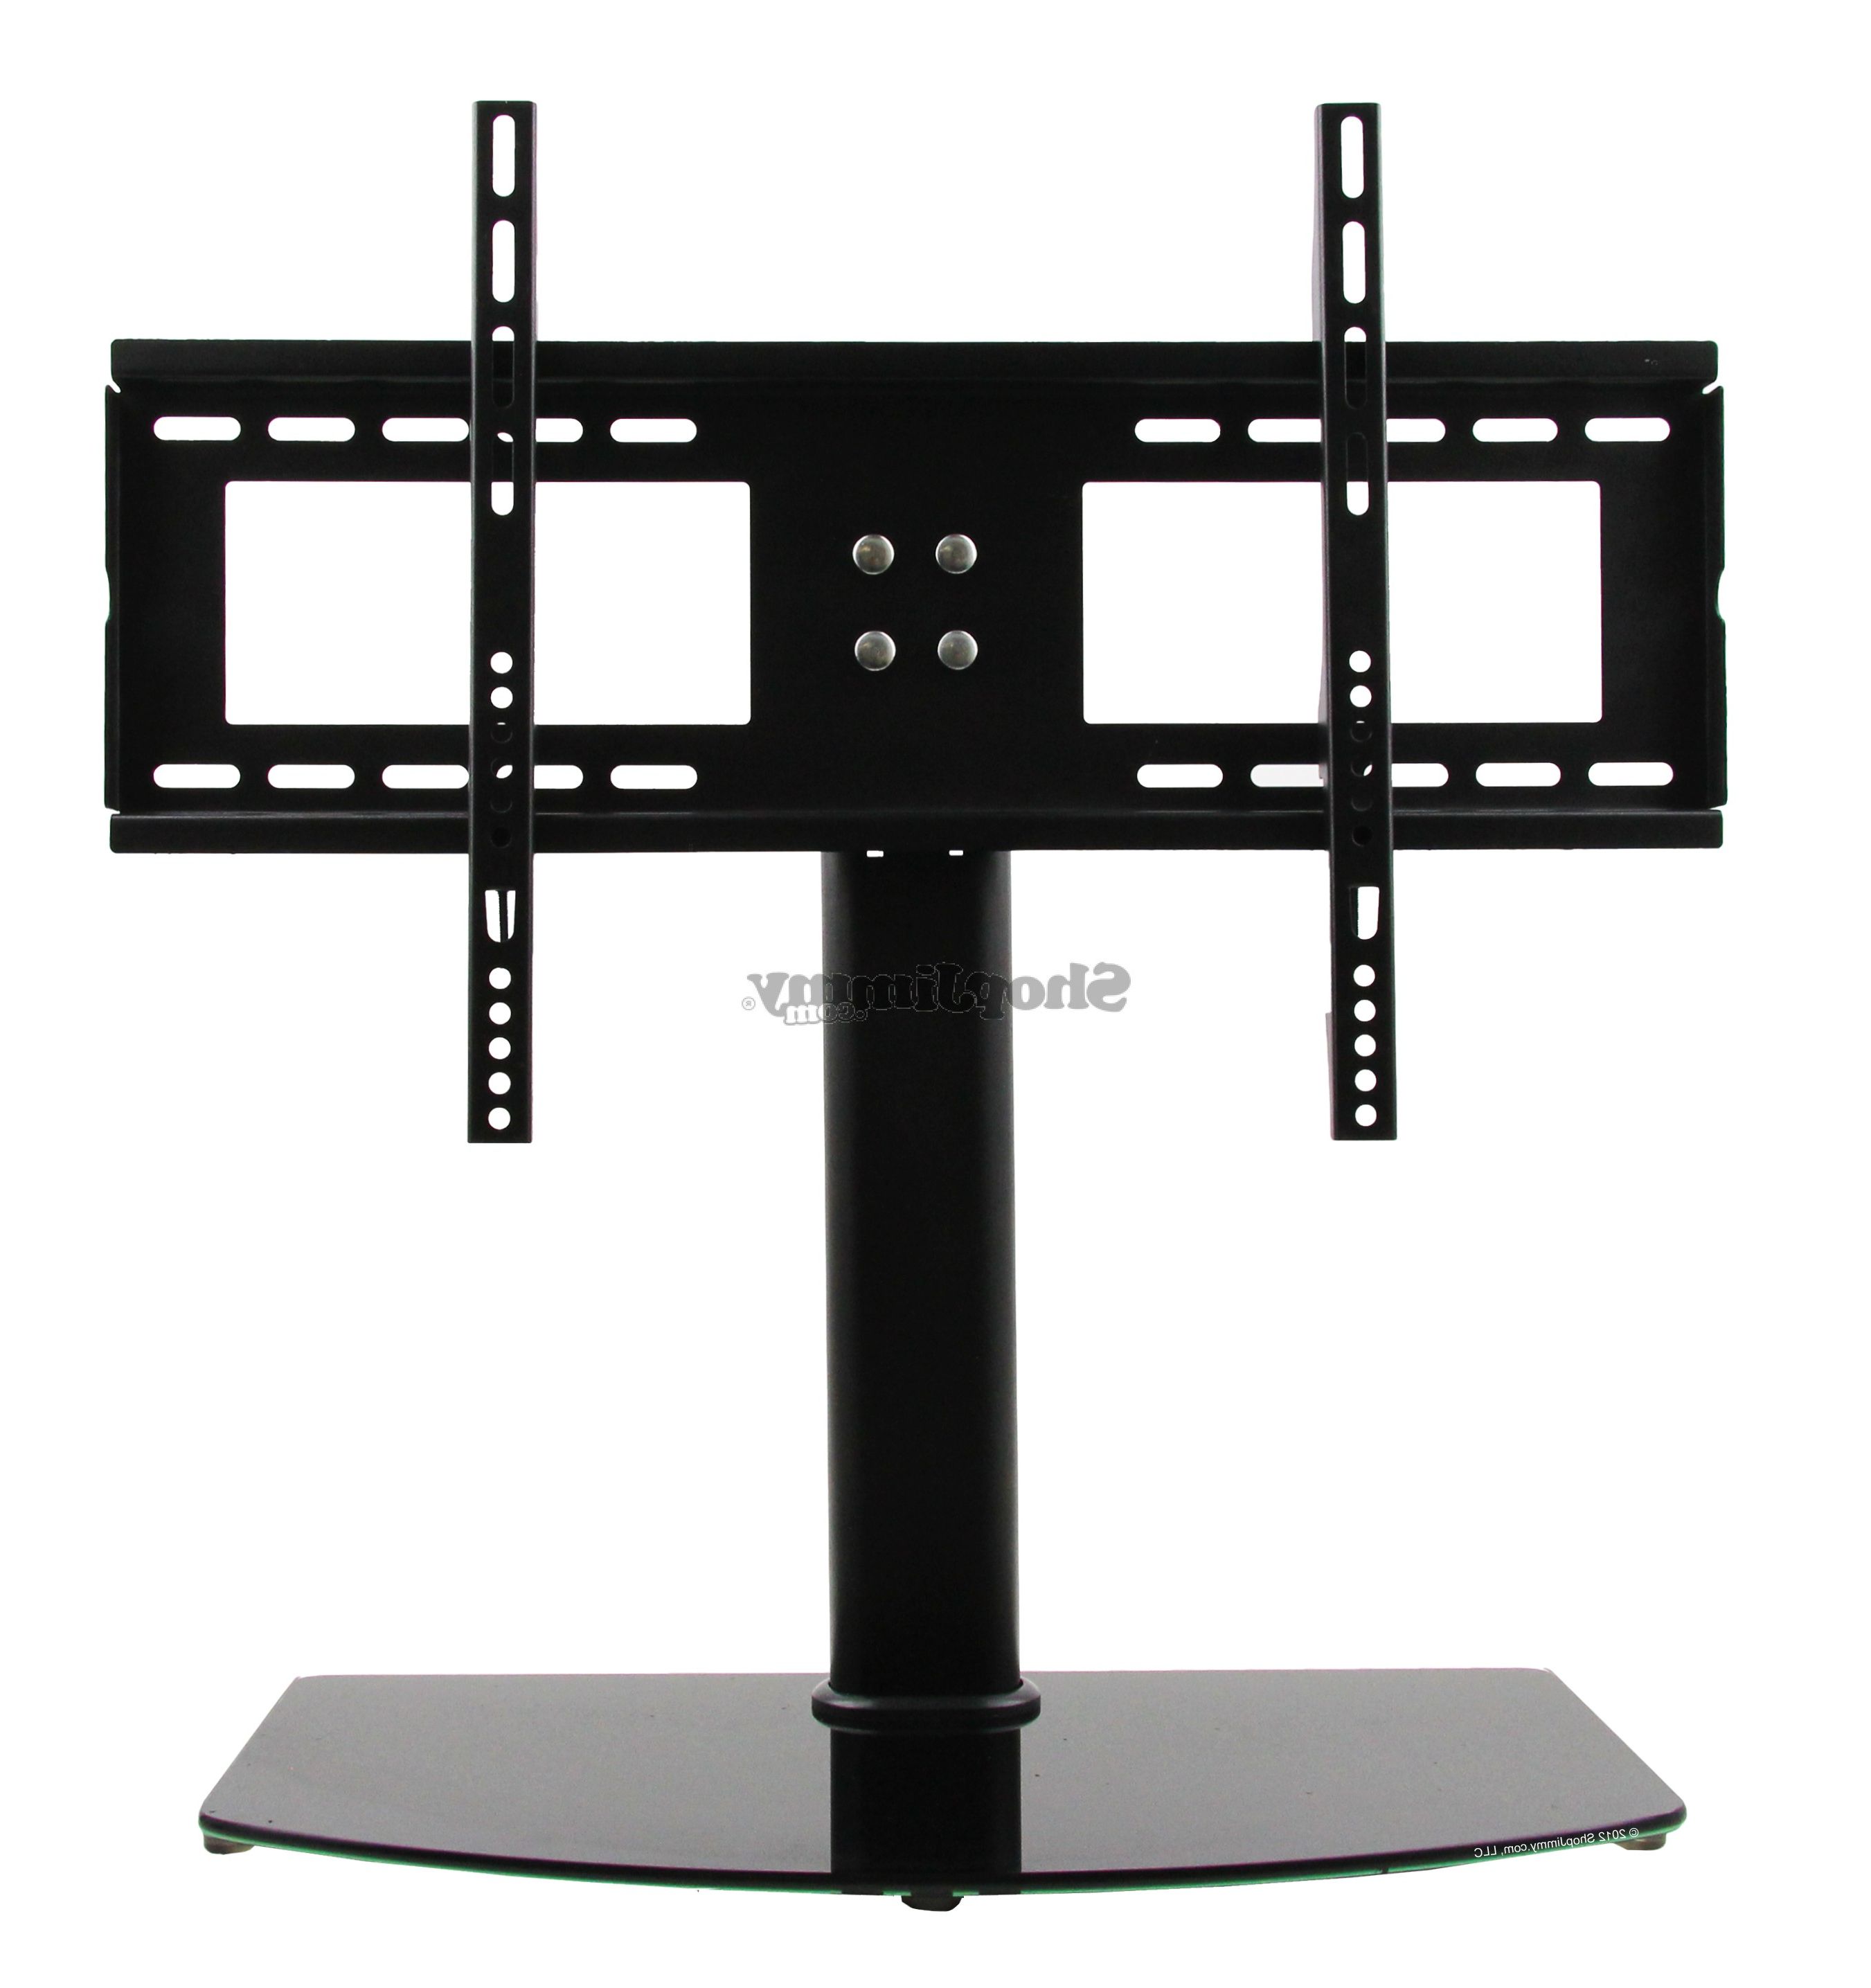 61 Inch Tv Stands With Regard To Well Known Universal Tv Stand/base + Wall Mount For 37" 55" Flat Screen Tvs (View 17 of 20)